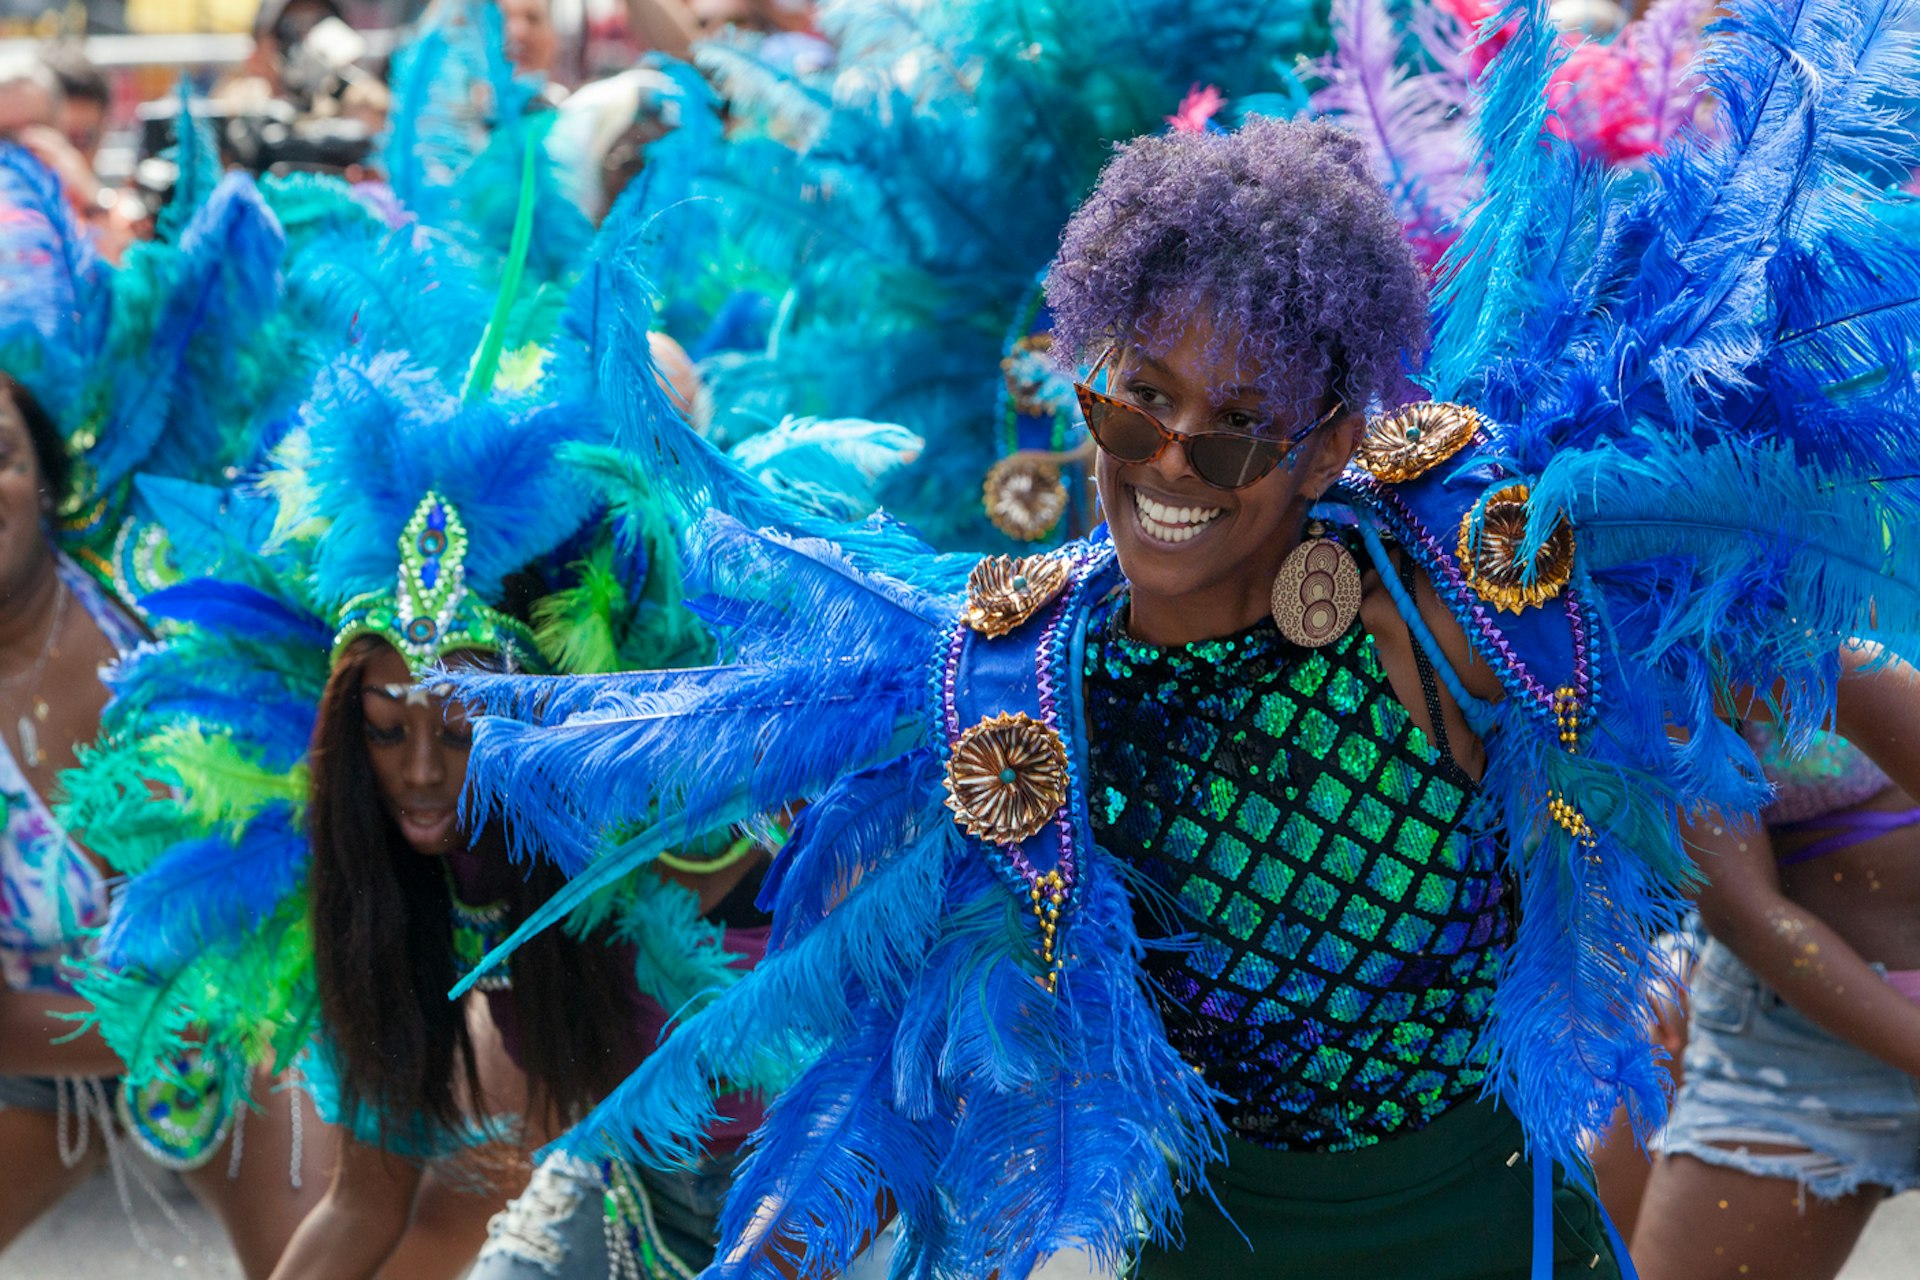 Dancers in colorful costumes for the Notting Hill Carnival